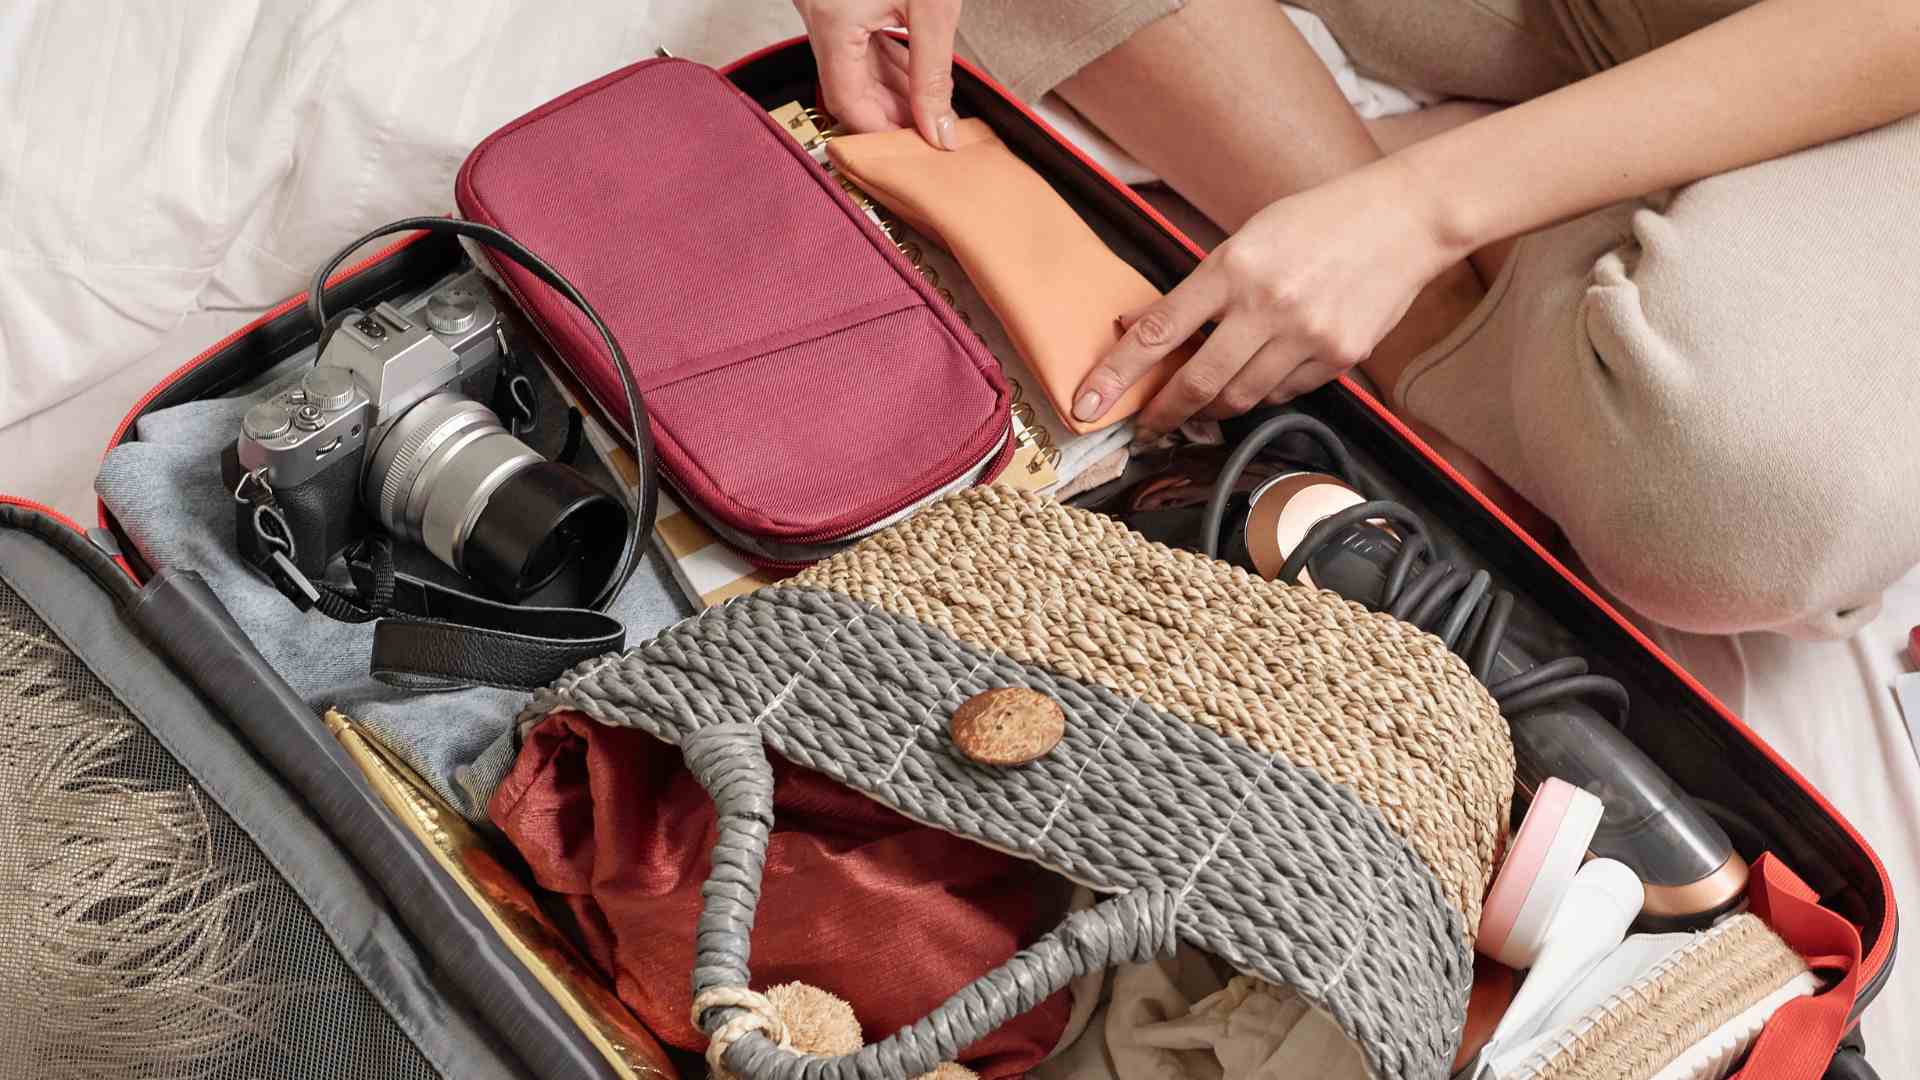 packing traveling tips